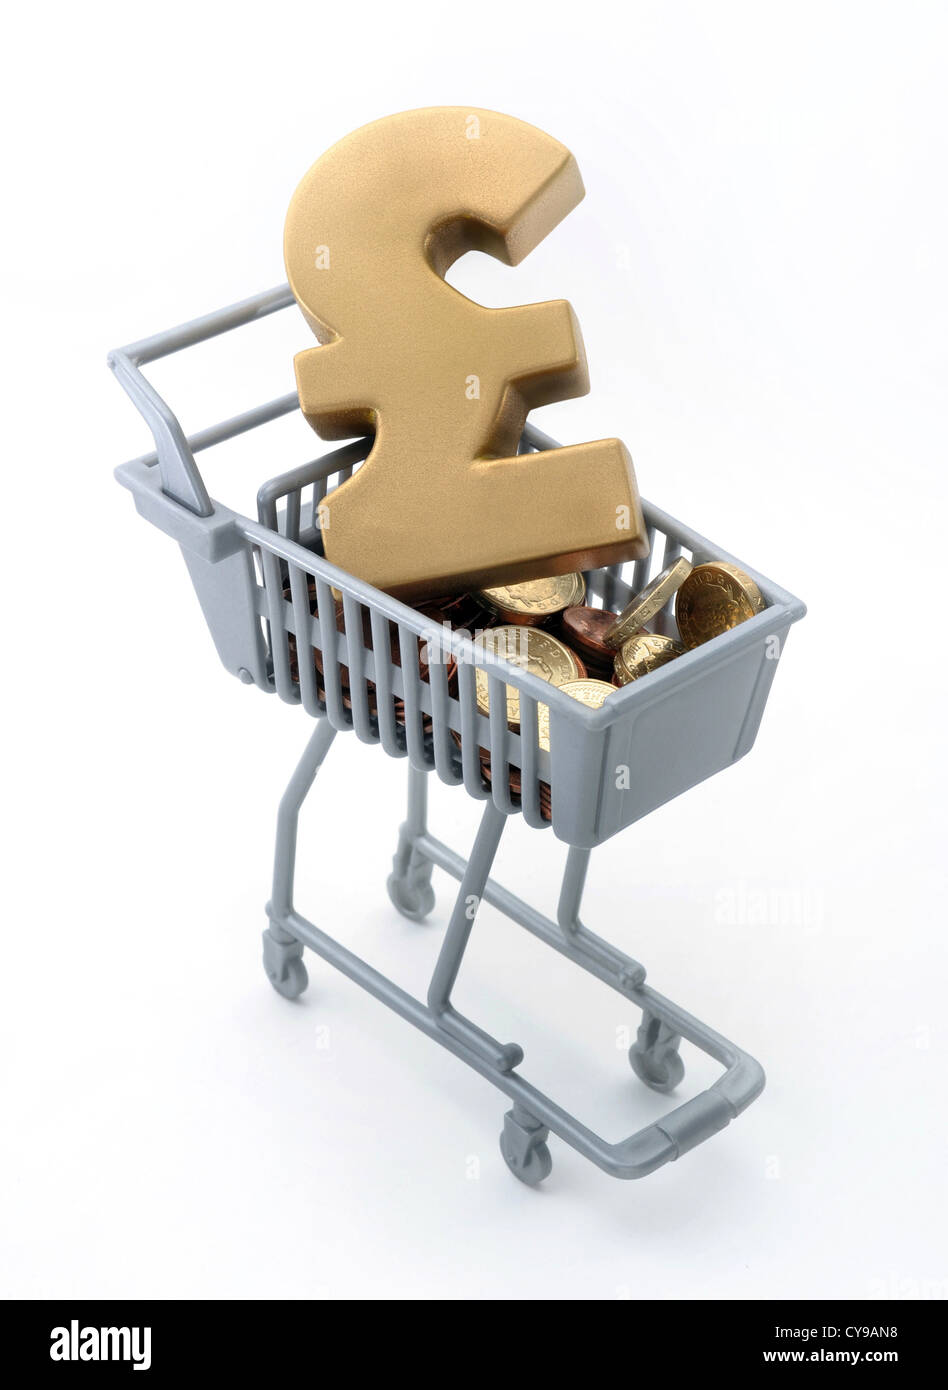 POUND SIGN AND CASH IN SHOPPING TROLLEY  RE HOUSEHOLD BILLS COSTS MORTGAGES PRICES RISING  BUDGETS INCOMES WAGES  FINANCE UK Stock Photo